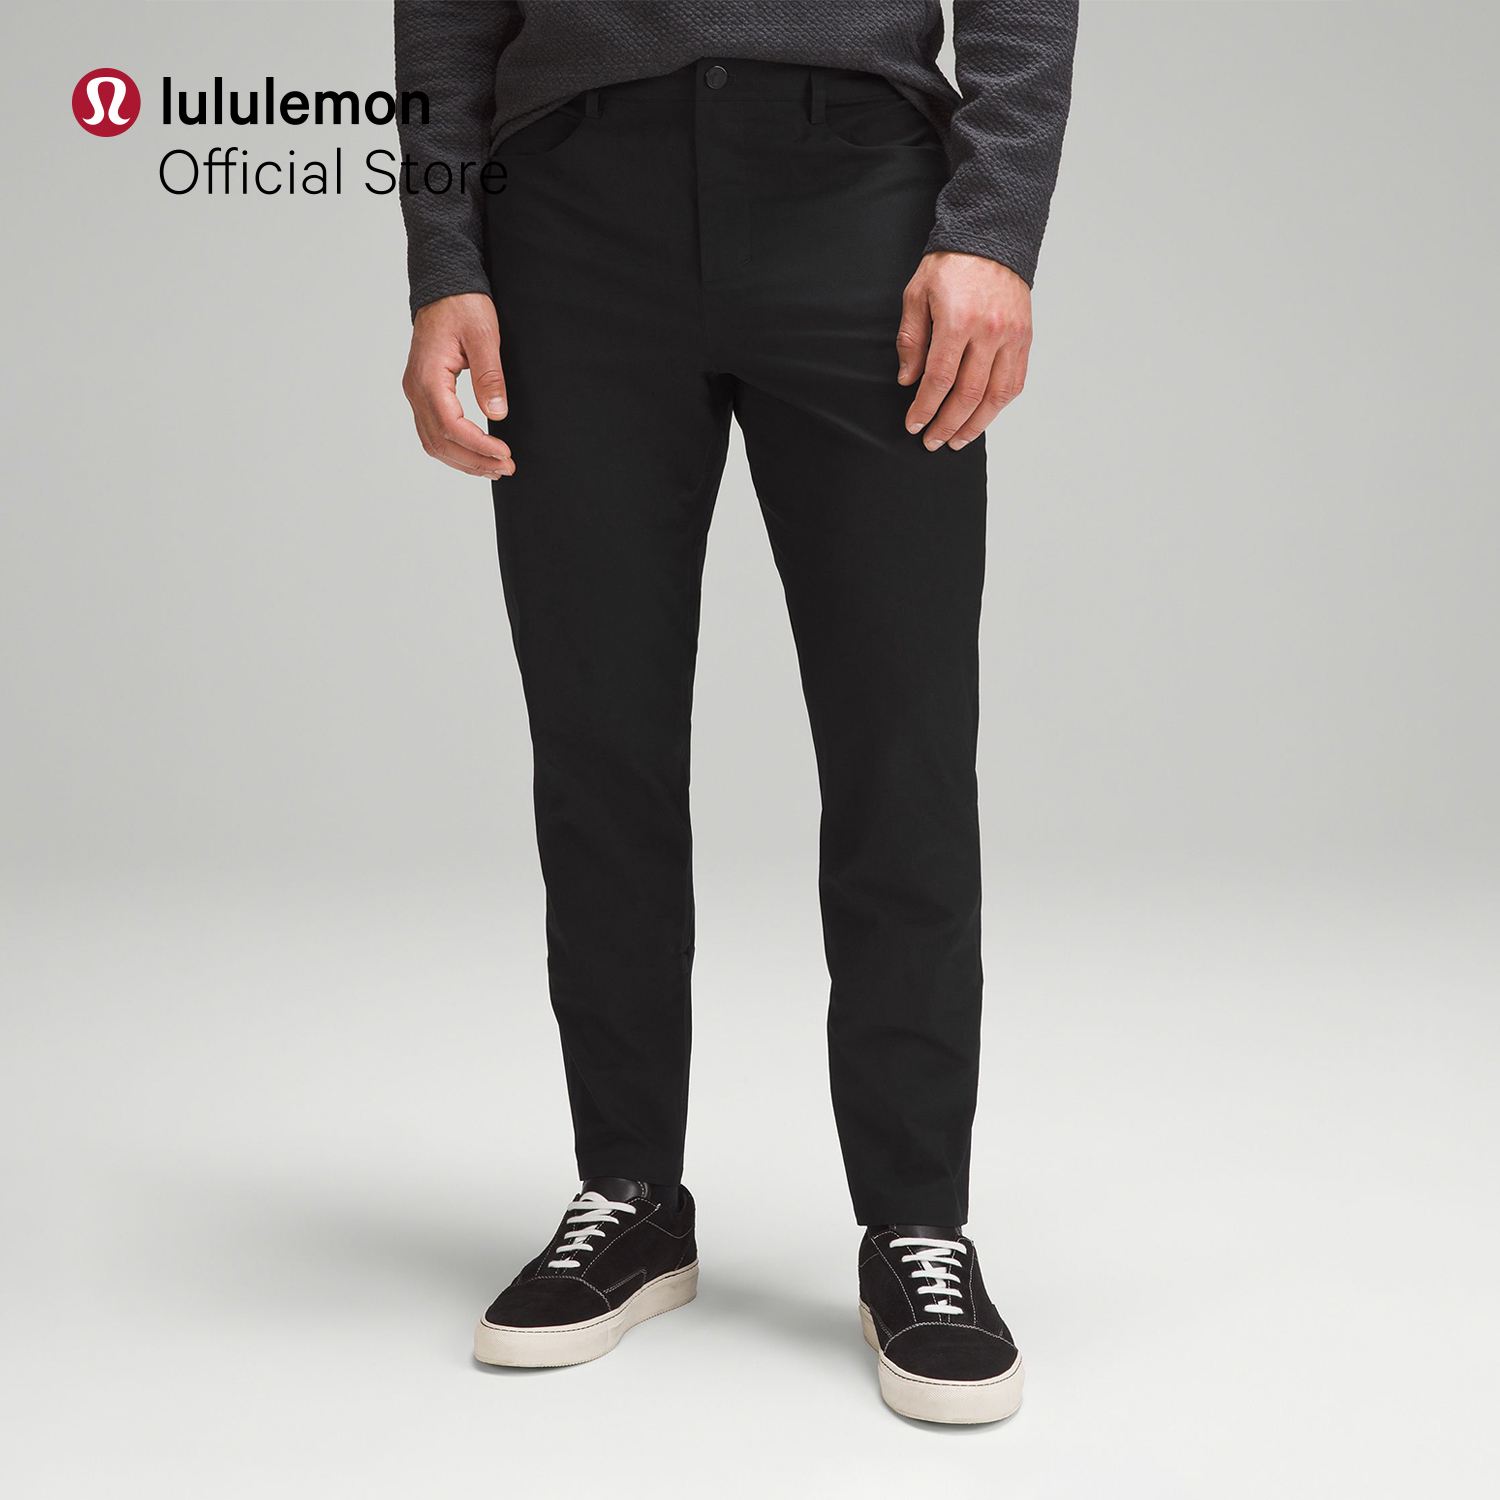 lululemon athletica Abc Classic-fit 5 Pocket Trousers 30l Warpstreme -  Color Brown - Size 28 in Natural for Men